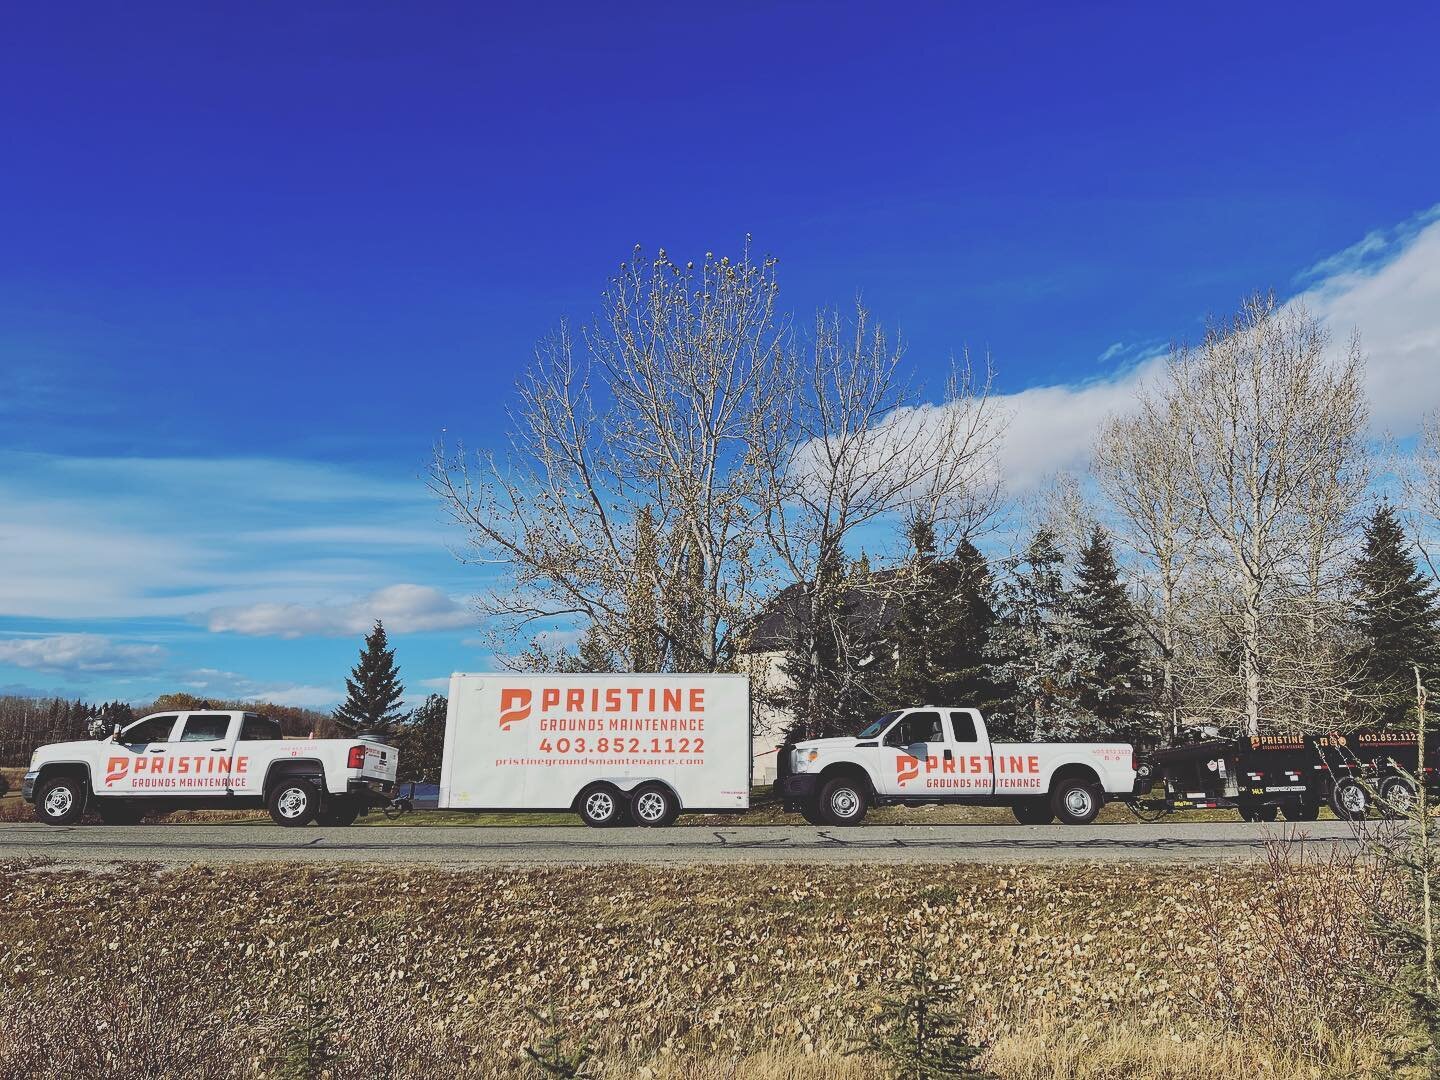 Seeing double 👀? We&rsquo;re so excited that we&rsquo;ve added a second truck to our fleet! And a huge thank you to @madmonkeyapparel and @canadiansignco for the vehicle decals!